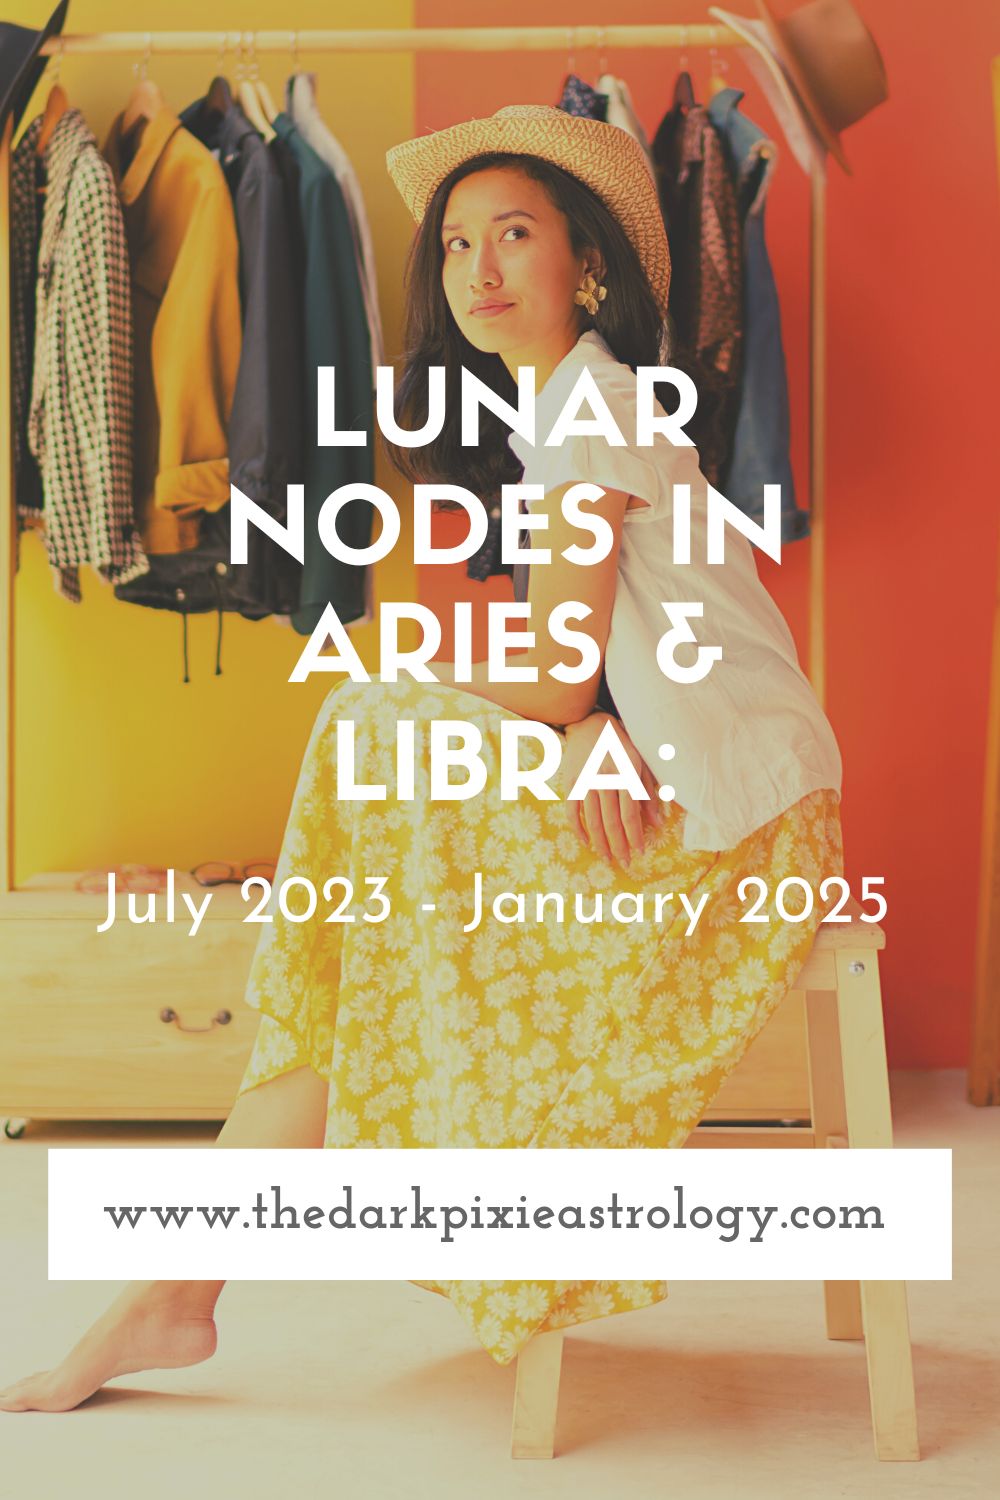 Lunar Nodes in Aries & Libra: July 2023 - January 2025 - The Dark Pixie Astrology